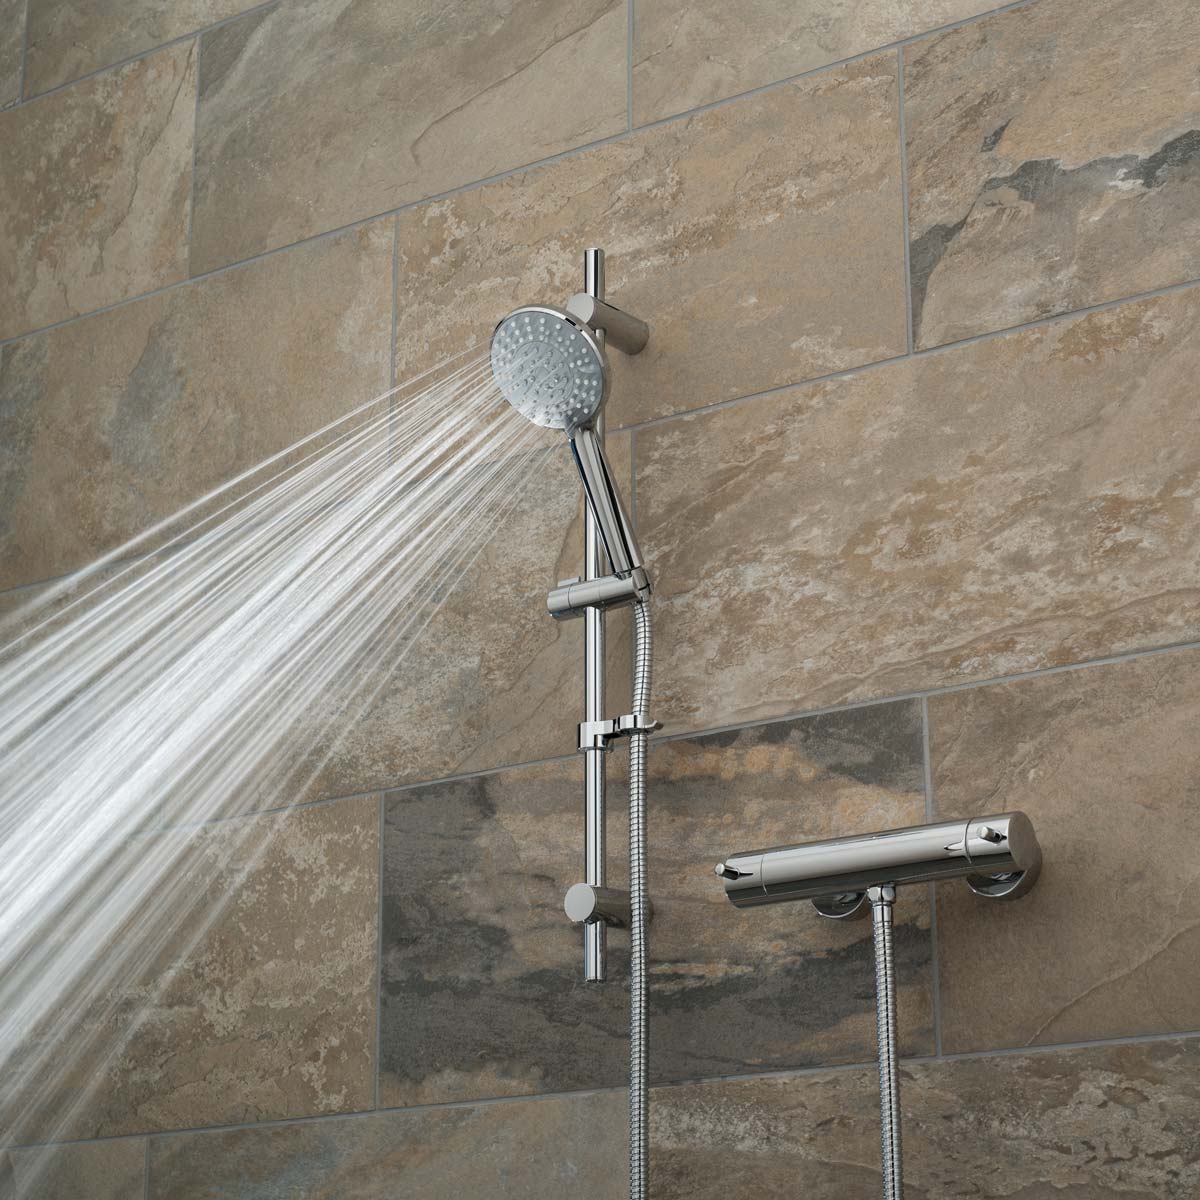 A slide rail shower kit with an exposed thermostatic bar type valve on a brown tiled wall with a wide spray pattern